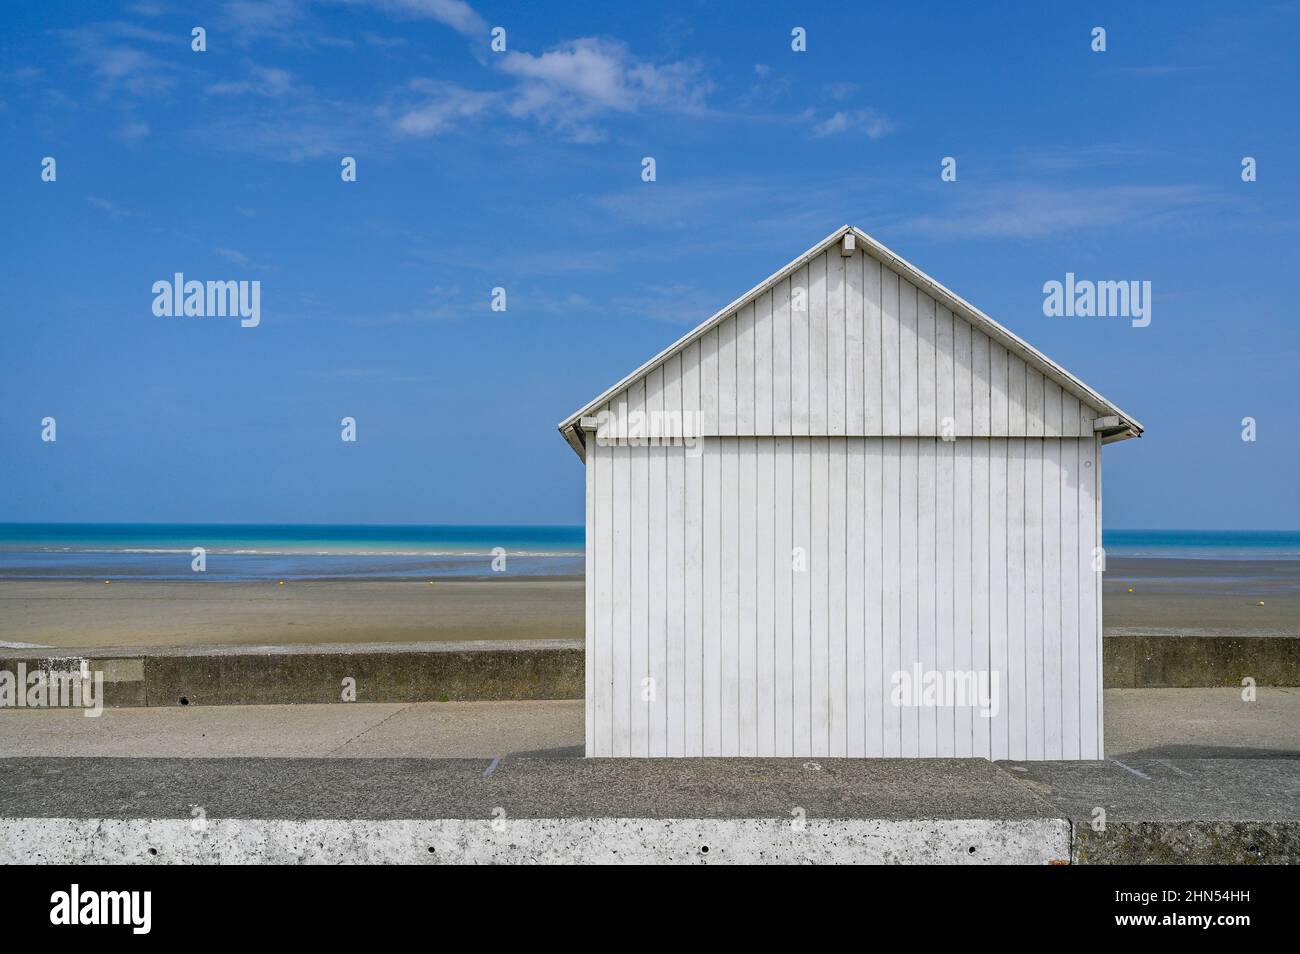 With its charming beach huts, the small seaside resort of Saint-Aubin-sur-Mer boast the only true sandy beach of the Côte d'Albâtre in Normandy, Franc Stock Photo